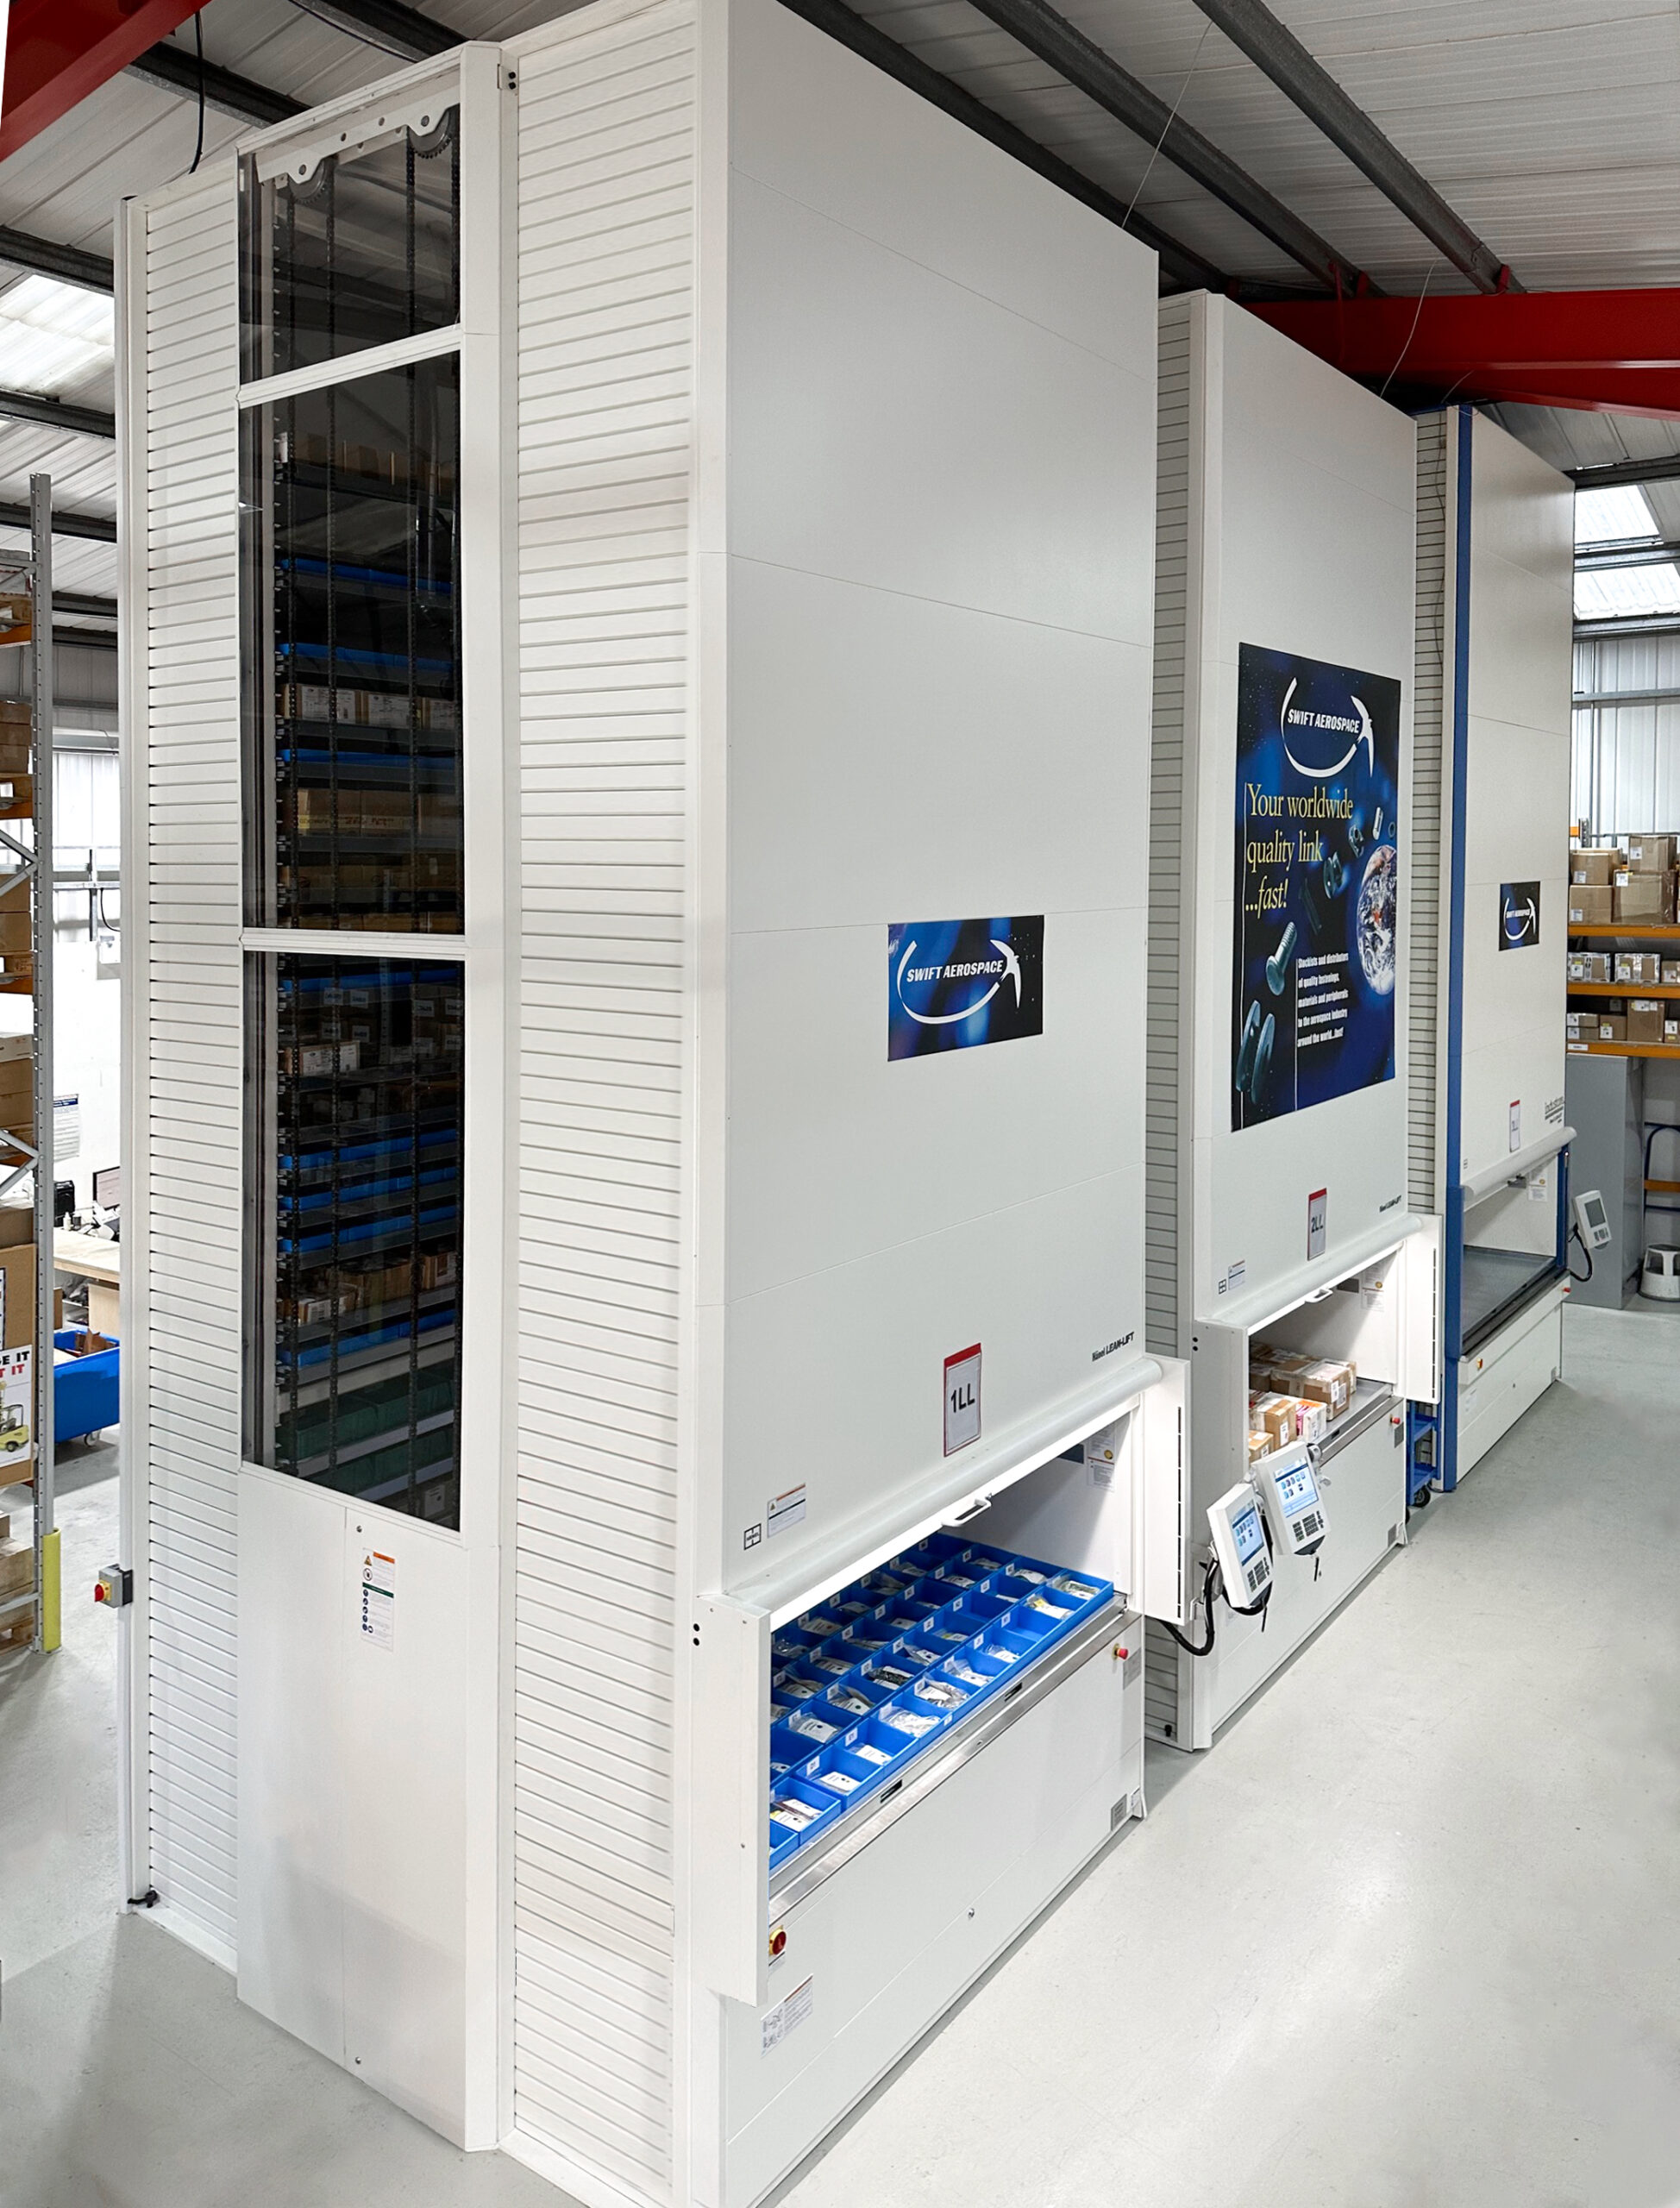 Automated storage and retrieval systems by Industore in action.